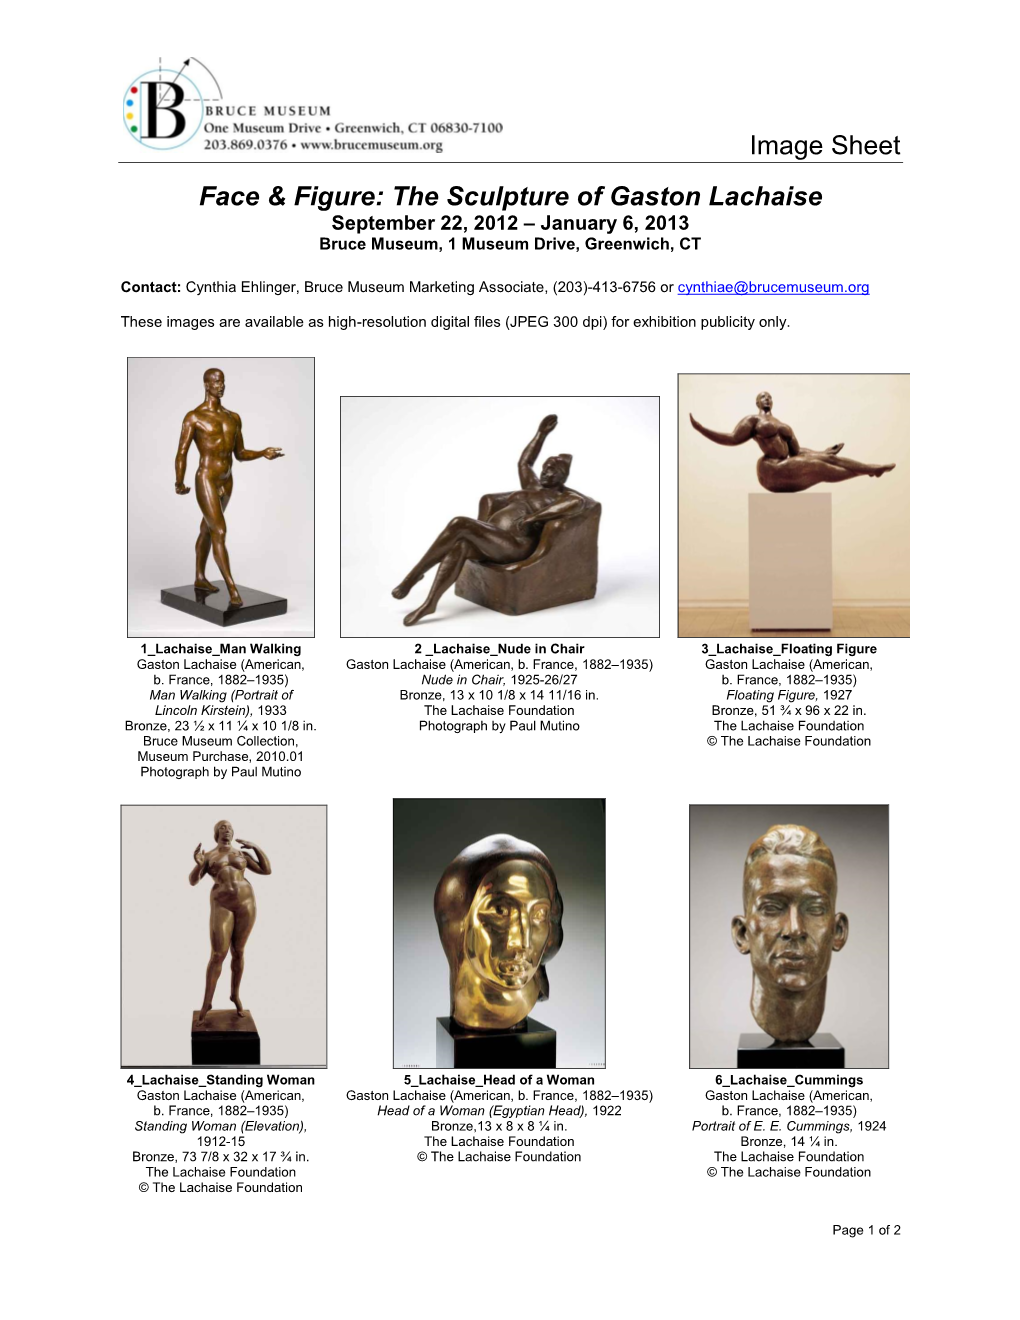 The Sculpture of Gaston Lachaise September 22, 2012 – January 6, 2013 Bruce Museum, 1 Museum Drive, Greenwich, CT